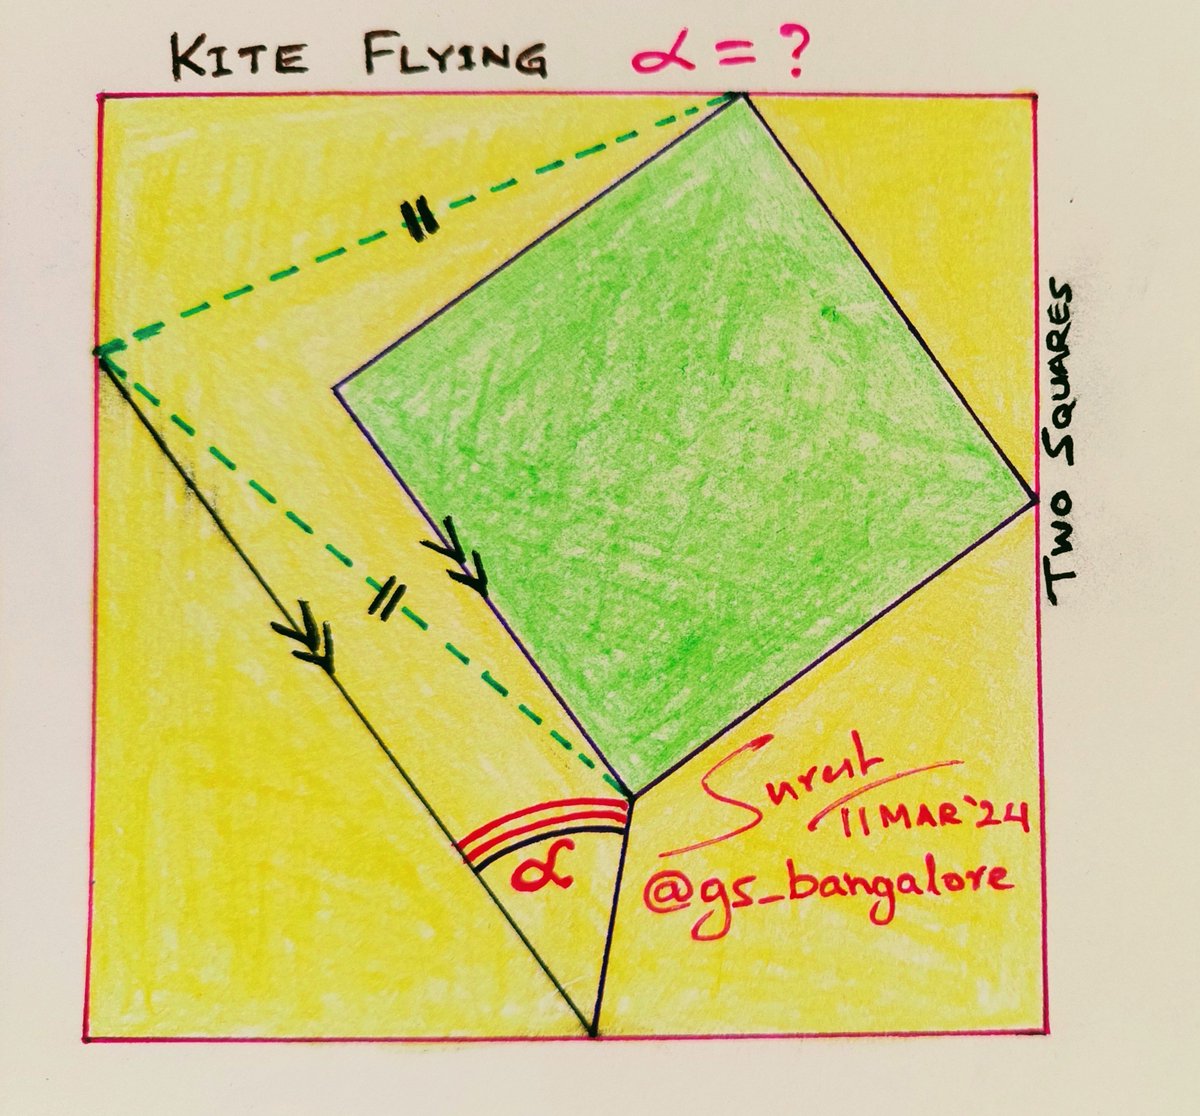 Kite Flying.

Two squares in constrained configuration. Angle alpha = ?

#square #geometry #geometrique #puzzle #thinking #logic #angle #reasoning #today #Triangle #diagonal #circle #similarity #mathteachers #math #teacher #mathematics #Algebra #highschool #students #learning